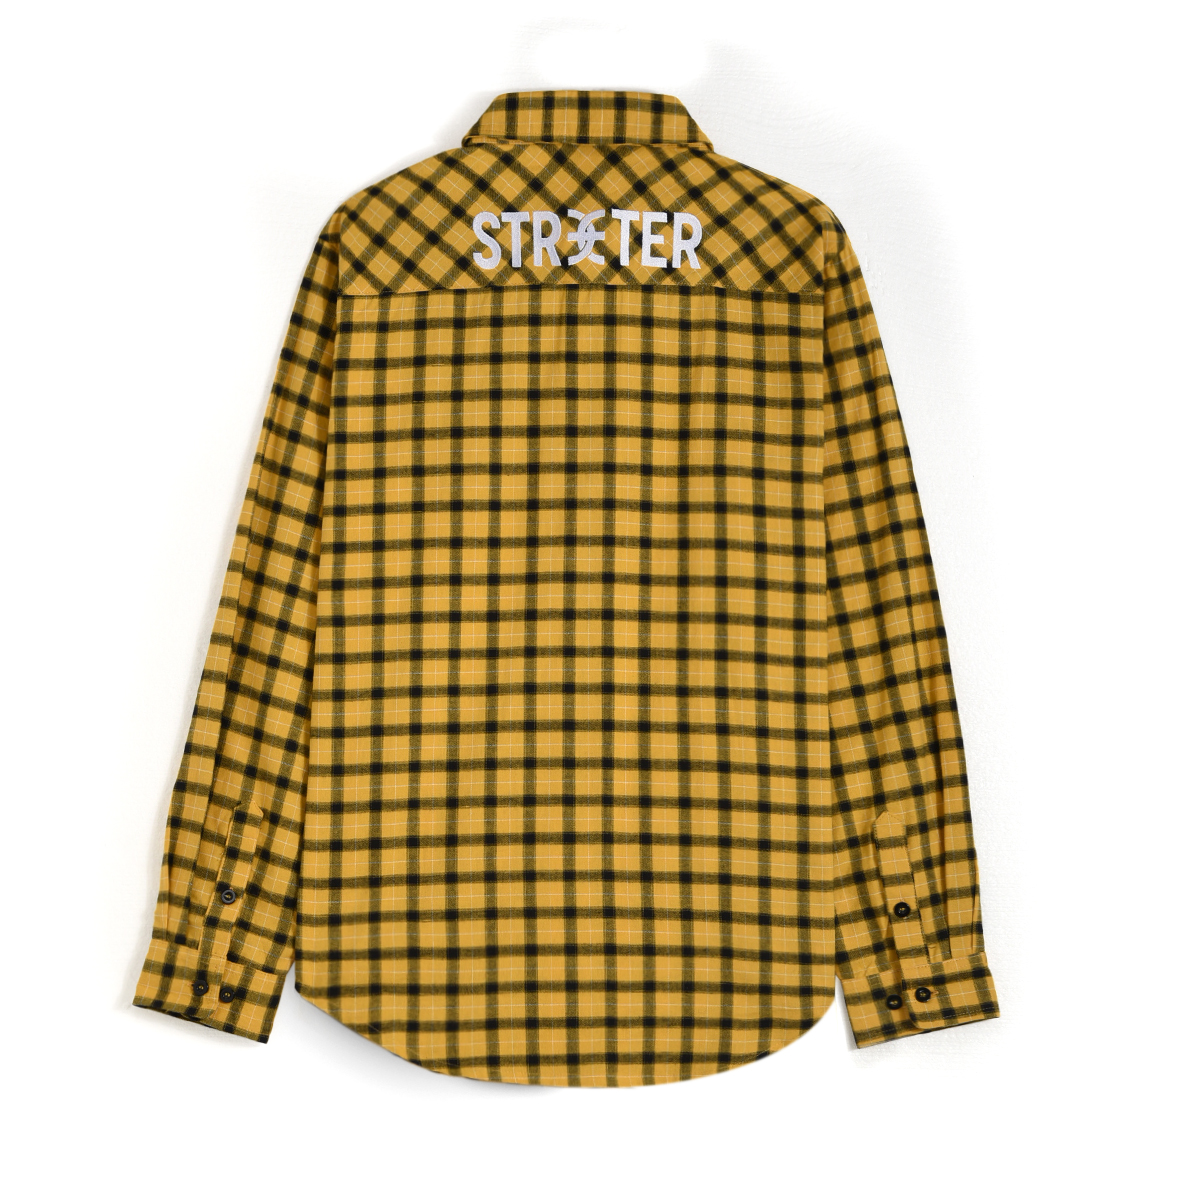 AungCrown designed long sleeves casual checked shirt